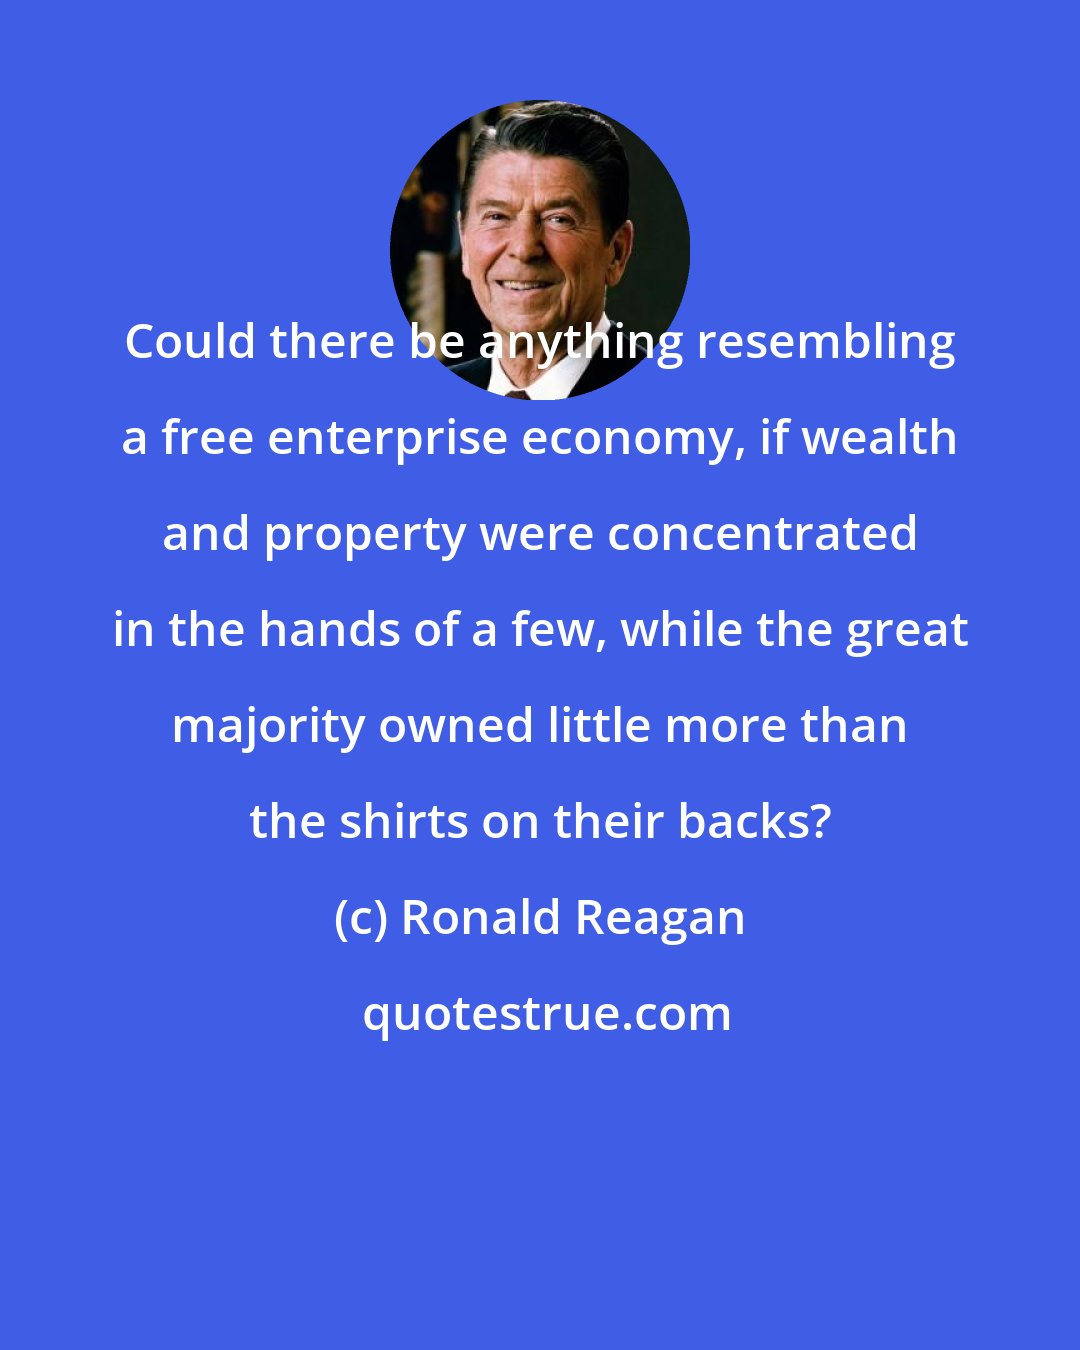 Ronald Reagan: Could there be anything resembling a free enterprise economy, if wealth and property were concentrated in the hands of a few, while the great majority owned little more than the shirts on their backs?